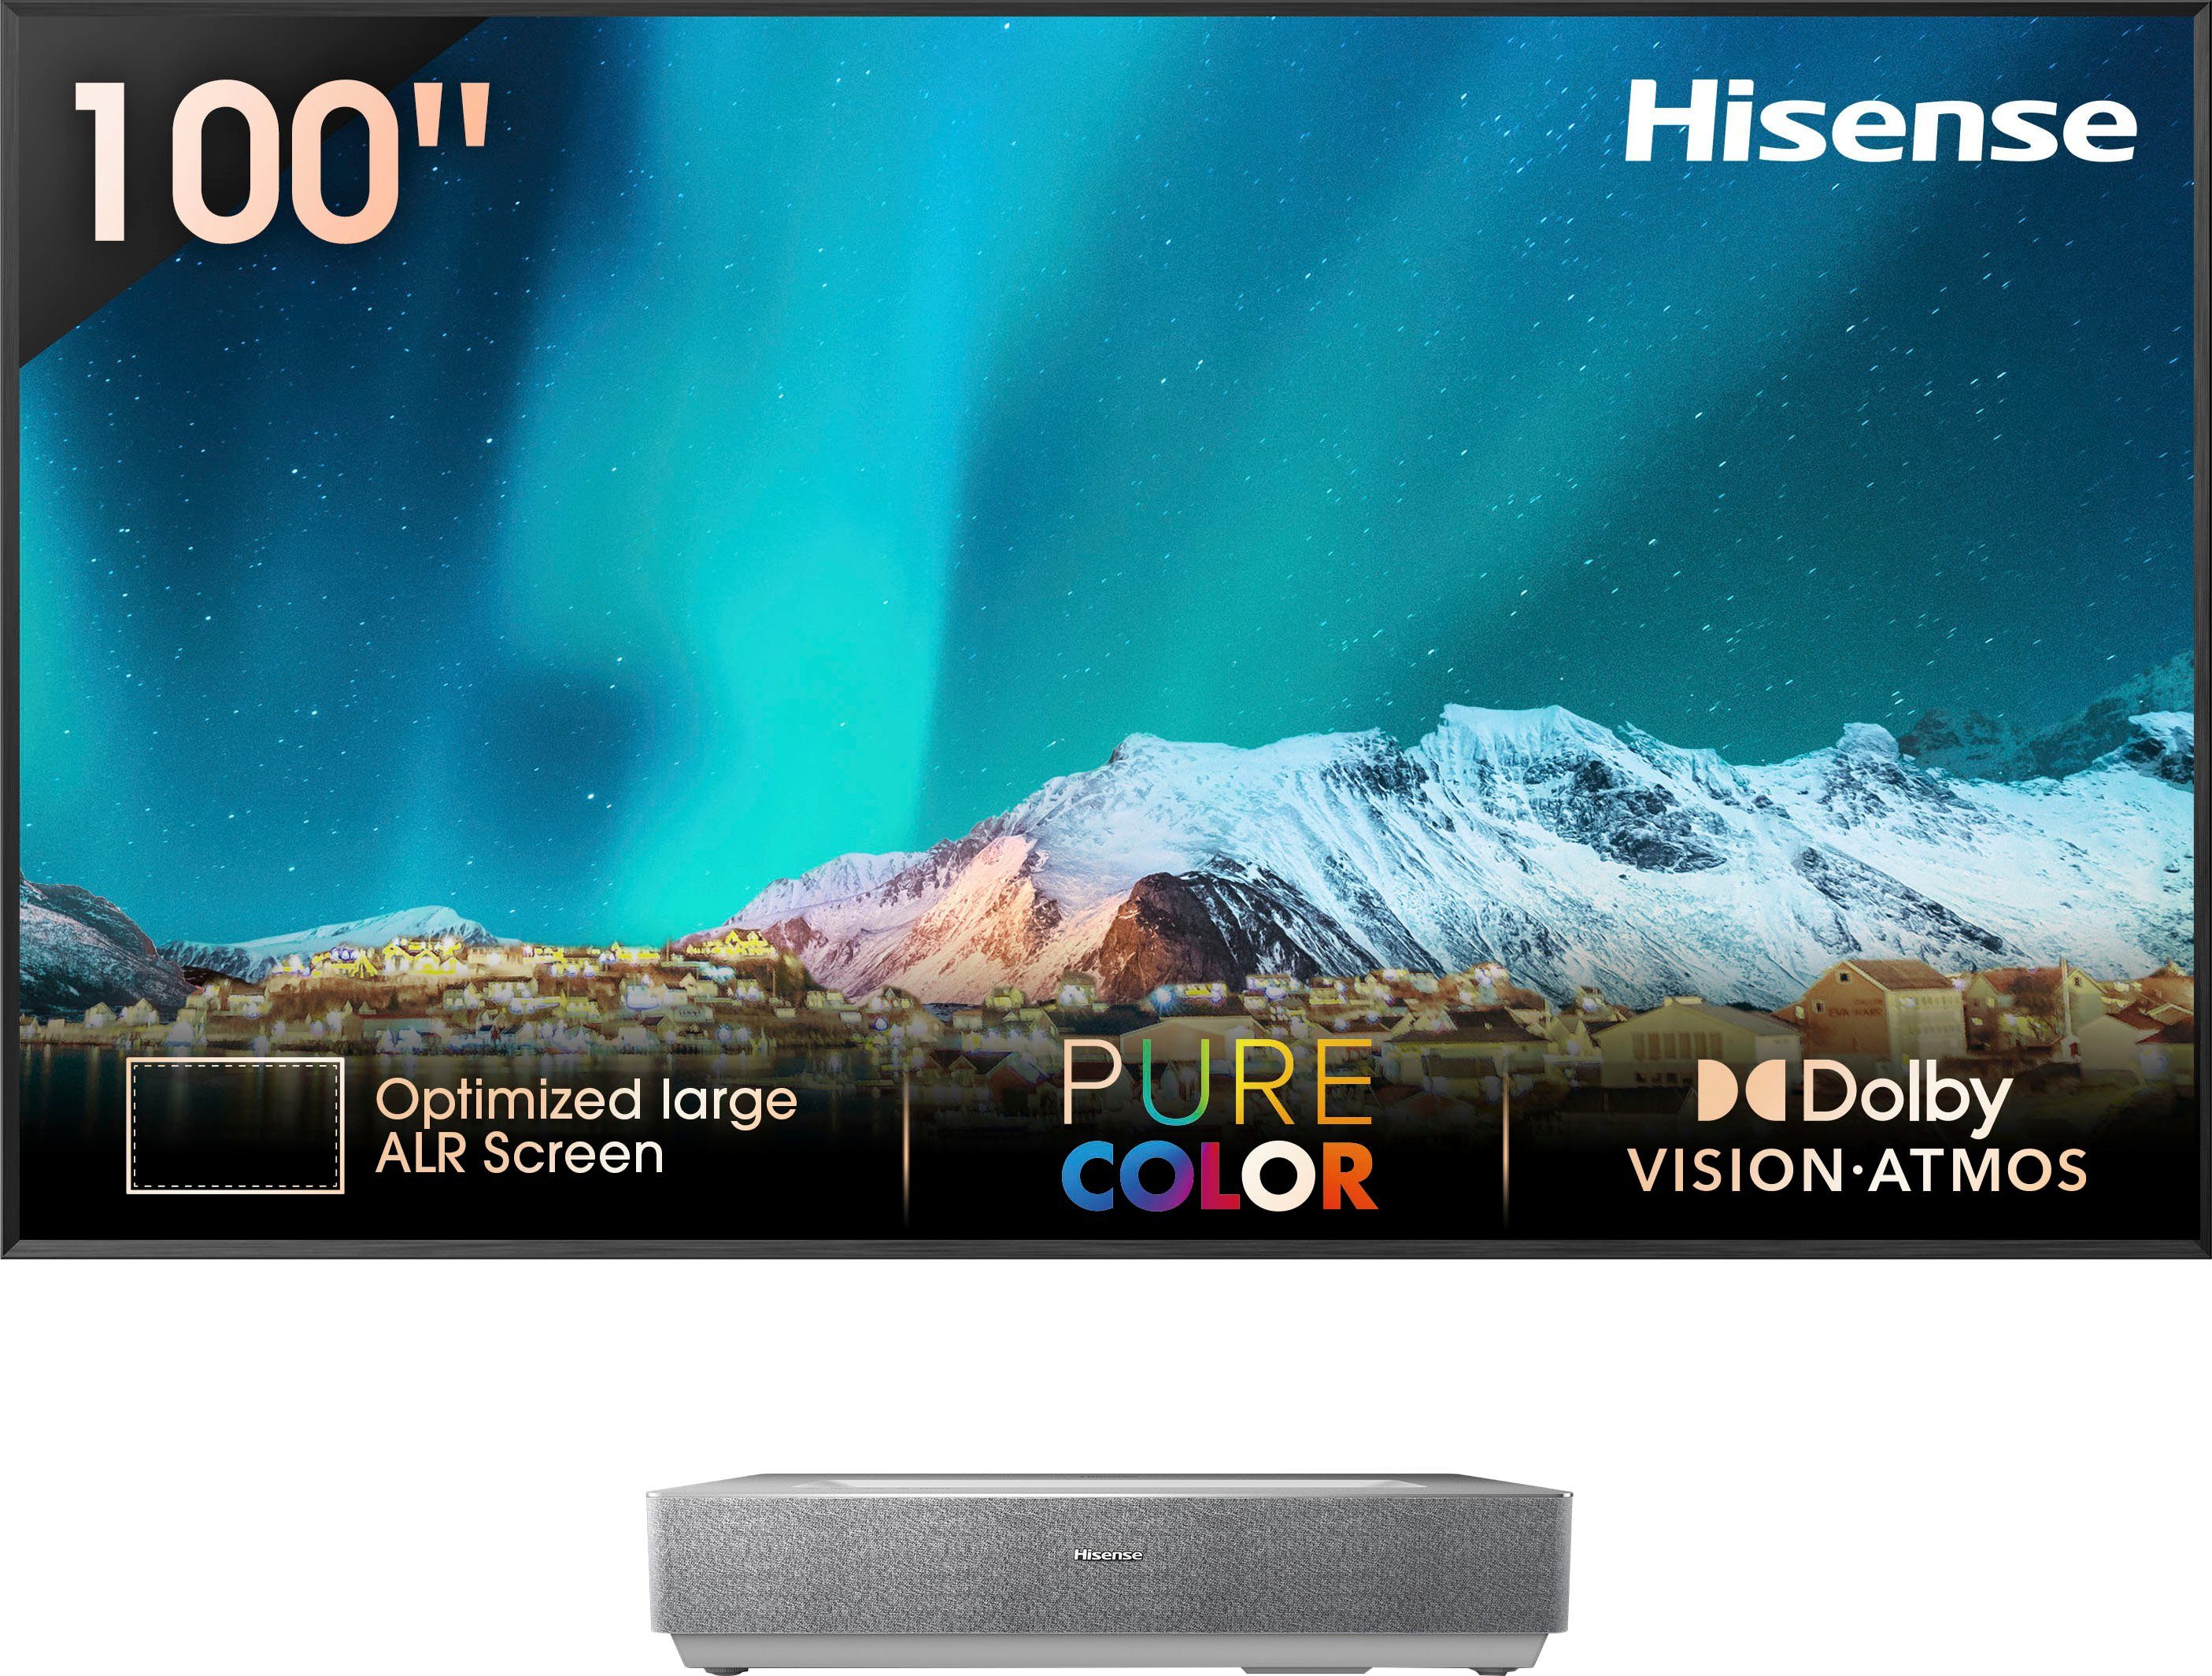 Hisense 100L5HD inkl. Soft Daylight Screen (100 Zoll) Laser-TV (2600 lm, 3840 x 2160 px, 4K, HDR, Game Mode, Dolby Atmos)